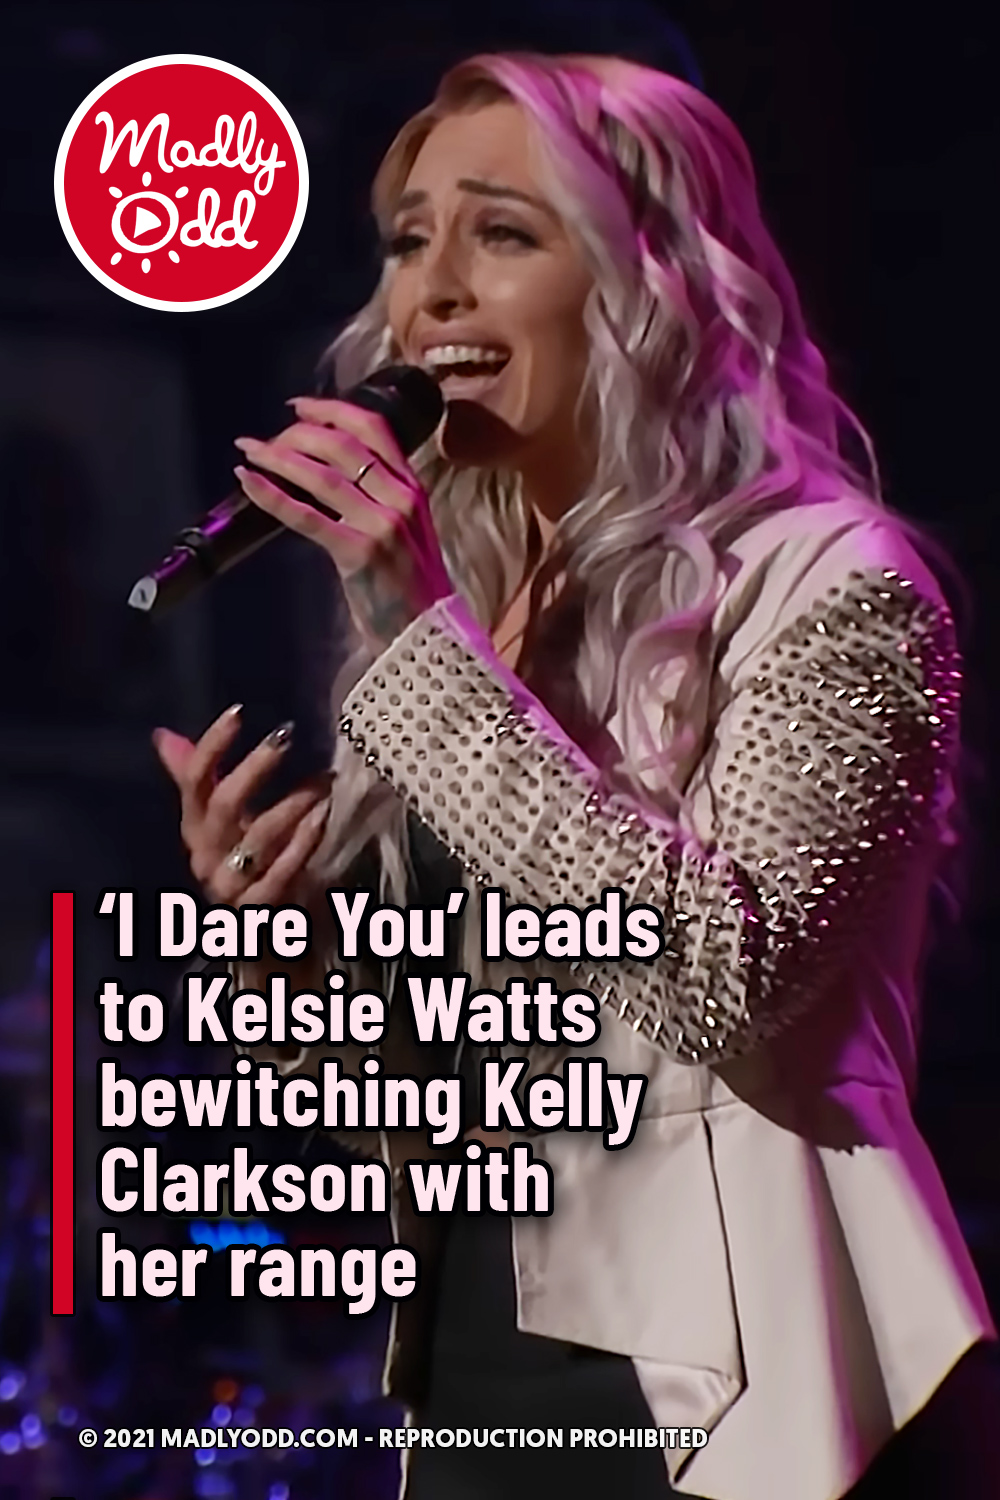 ‘I Dare You’ leads to Kelsie Watts bewitching Kelly Clarkson with her range